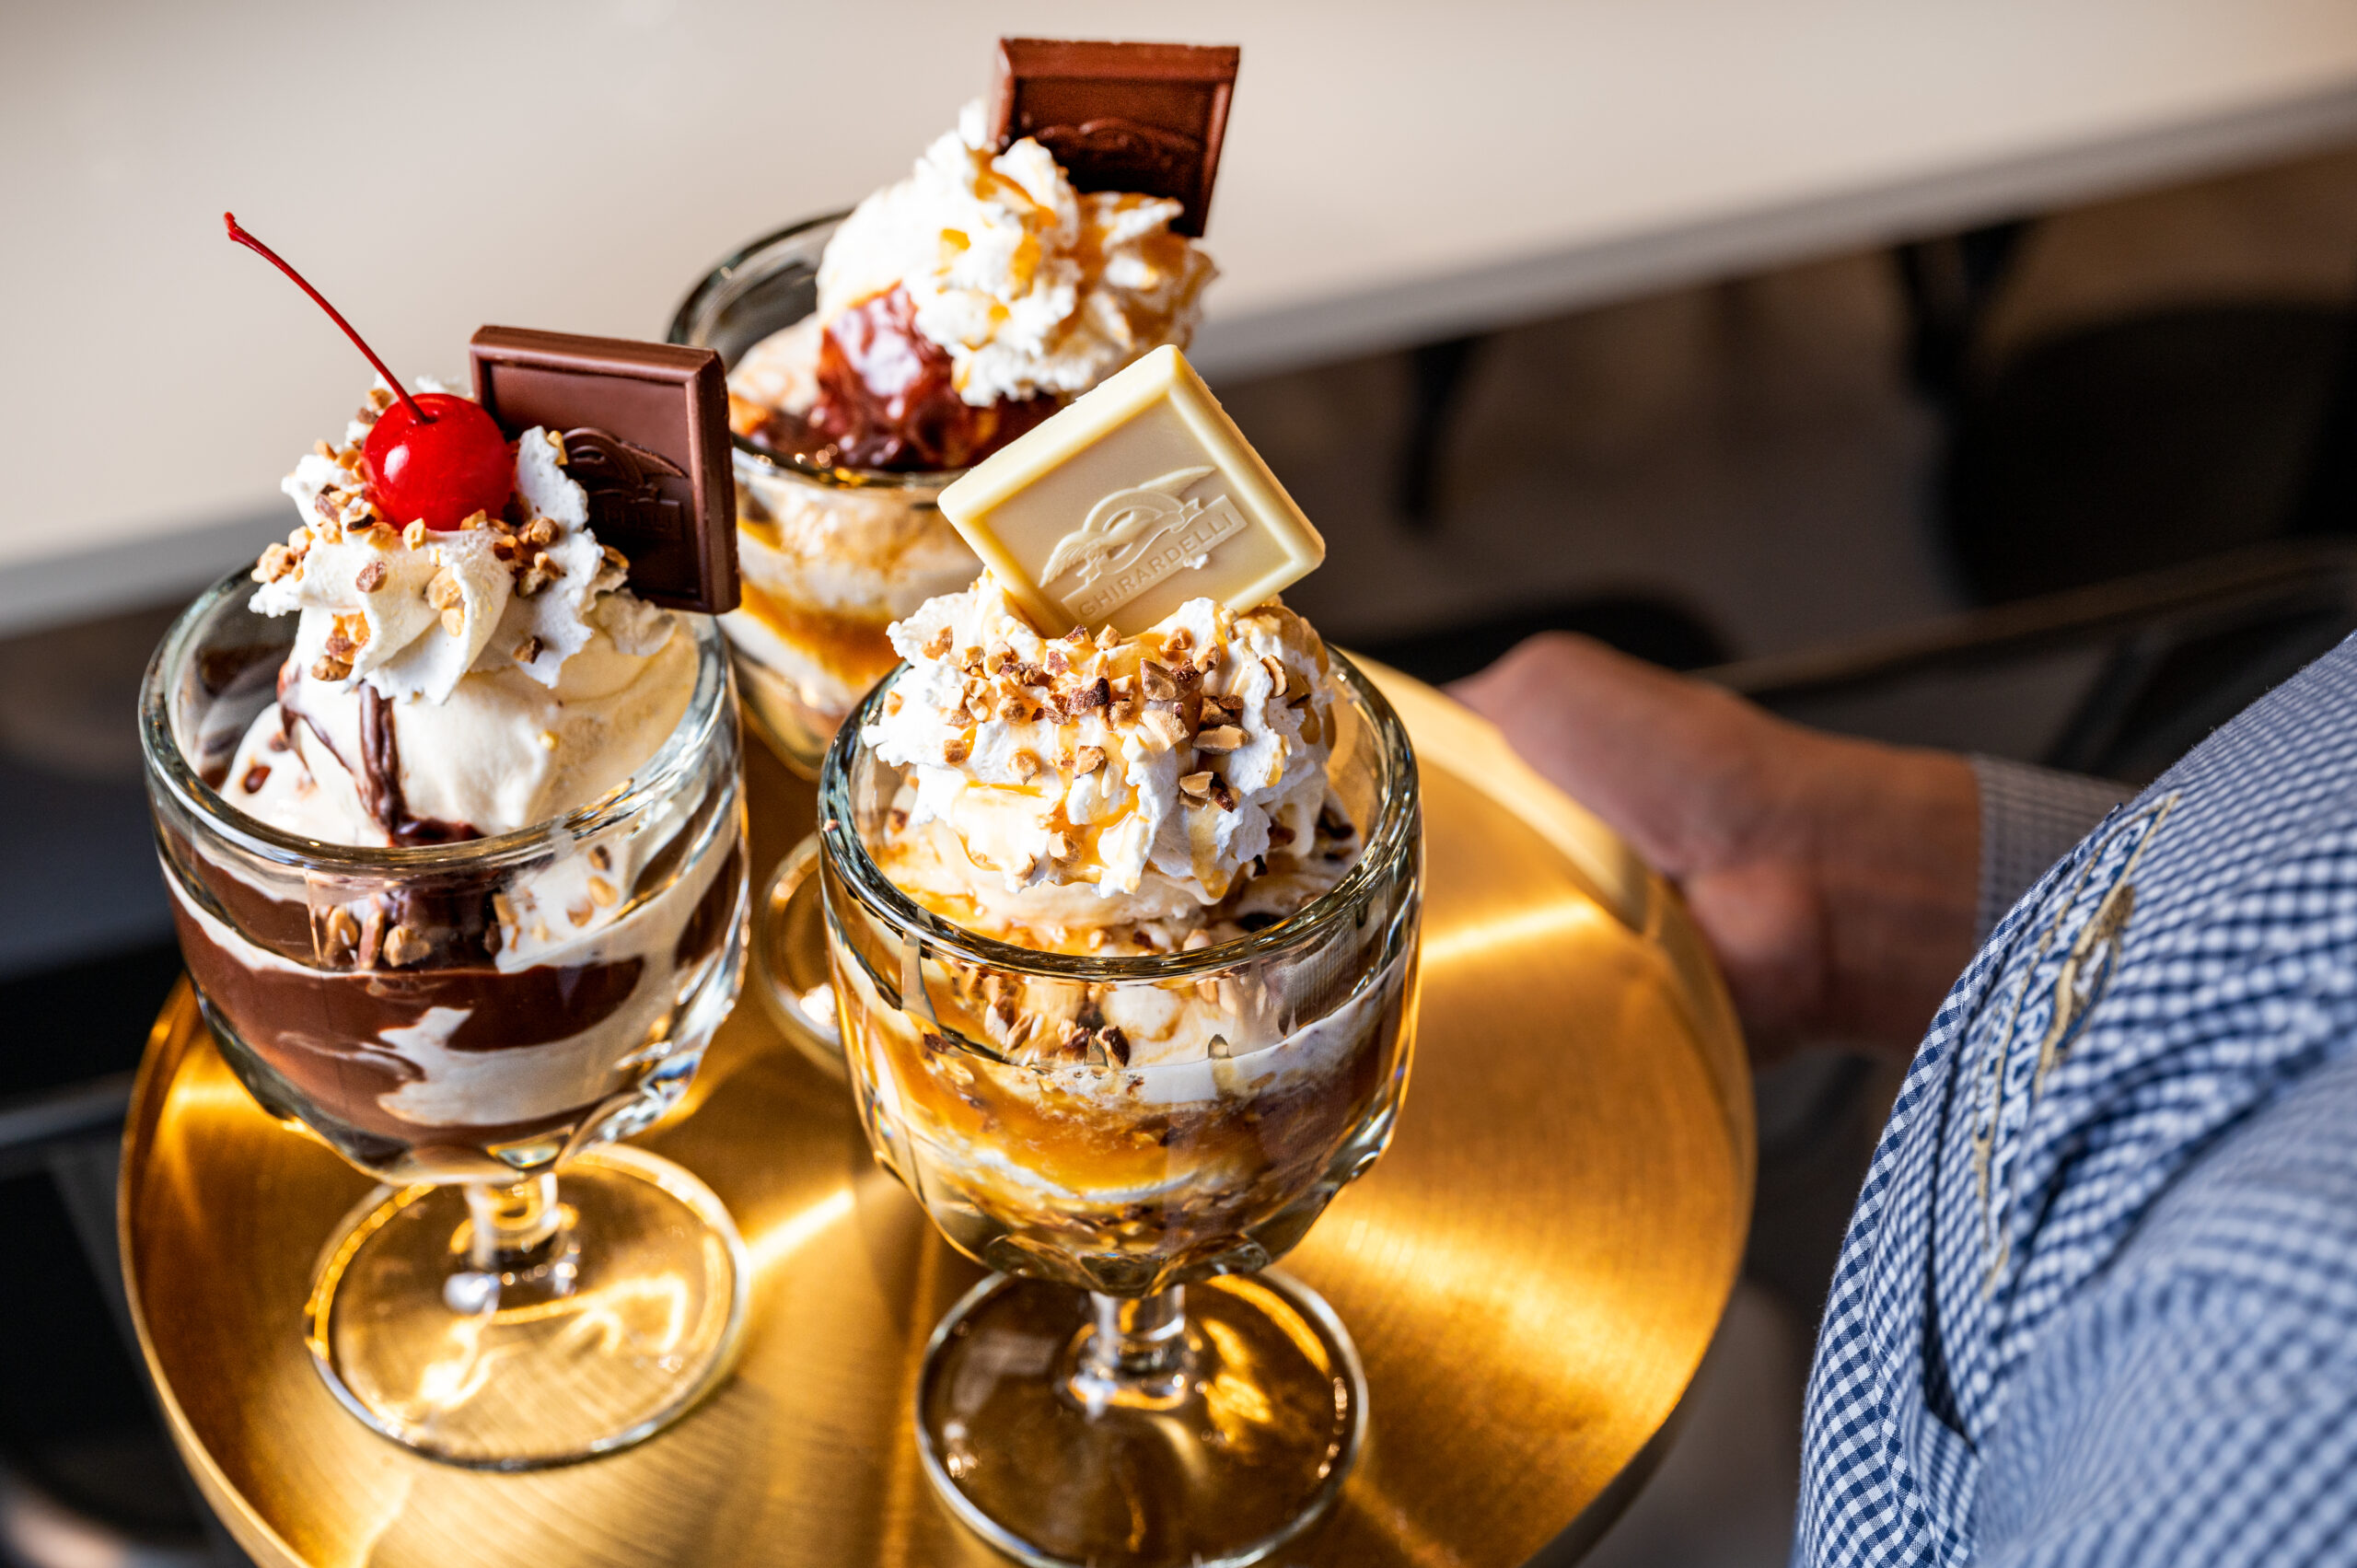 Ghirardelli Chocolate Company Announces Grand Reopening of Renovated Original Chocolate & Ice Cream Shop